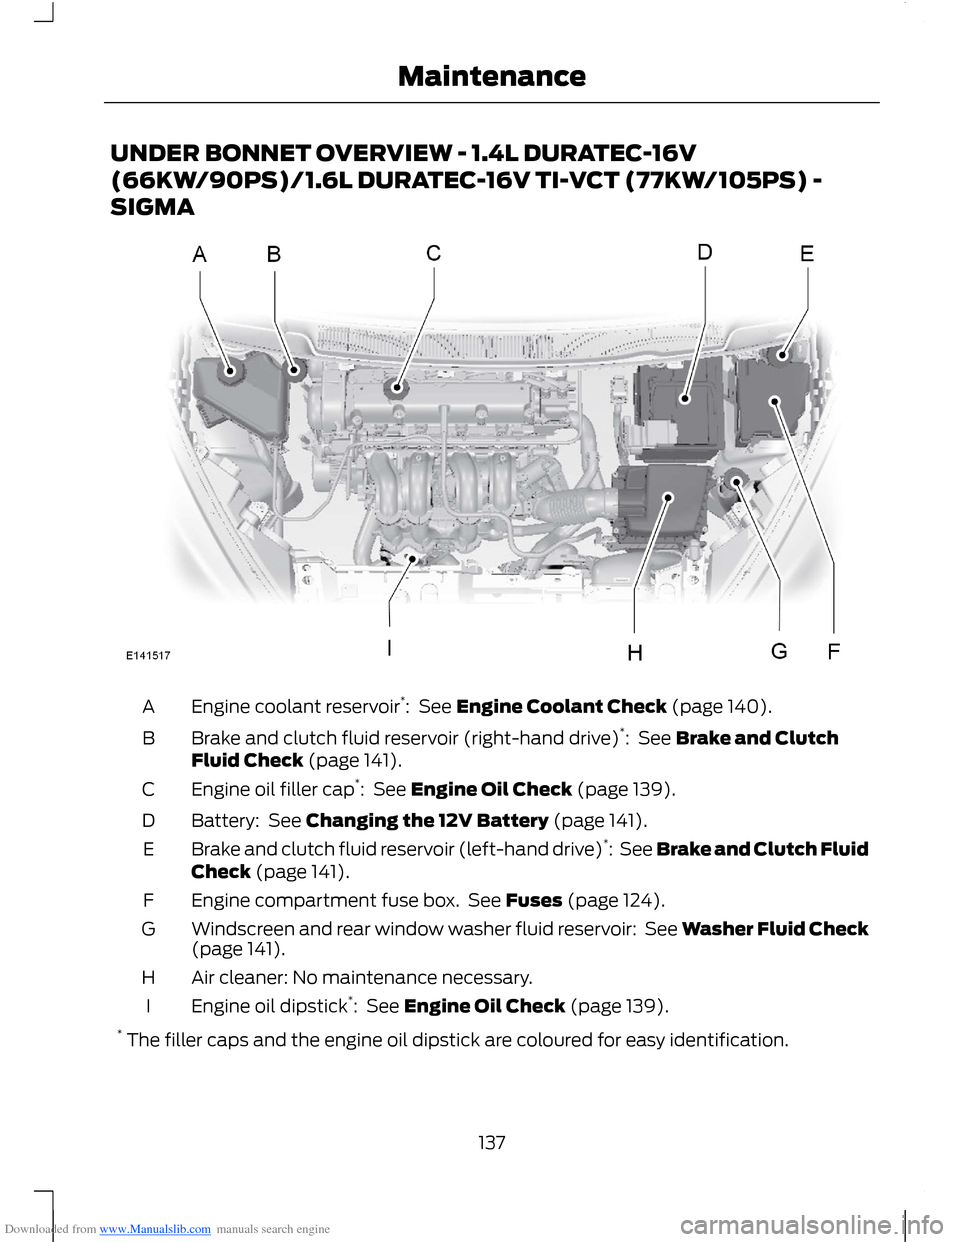 FORD B MAX 2012 1.G Owners Manual Downloaded from www.Manualslib.com manuals search engine UNDER BONNET OVERVIEW - 1.4L DURATEC-16V
(66KW/90PS)/1.6L DURATEC-16V TI-VCT (77KW/105PS) -
SIGMA
Engine coolant reservoir*:  See Engine Coolan